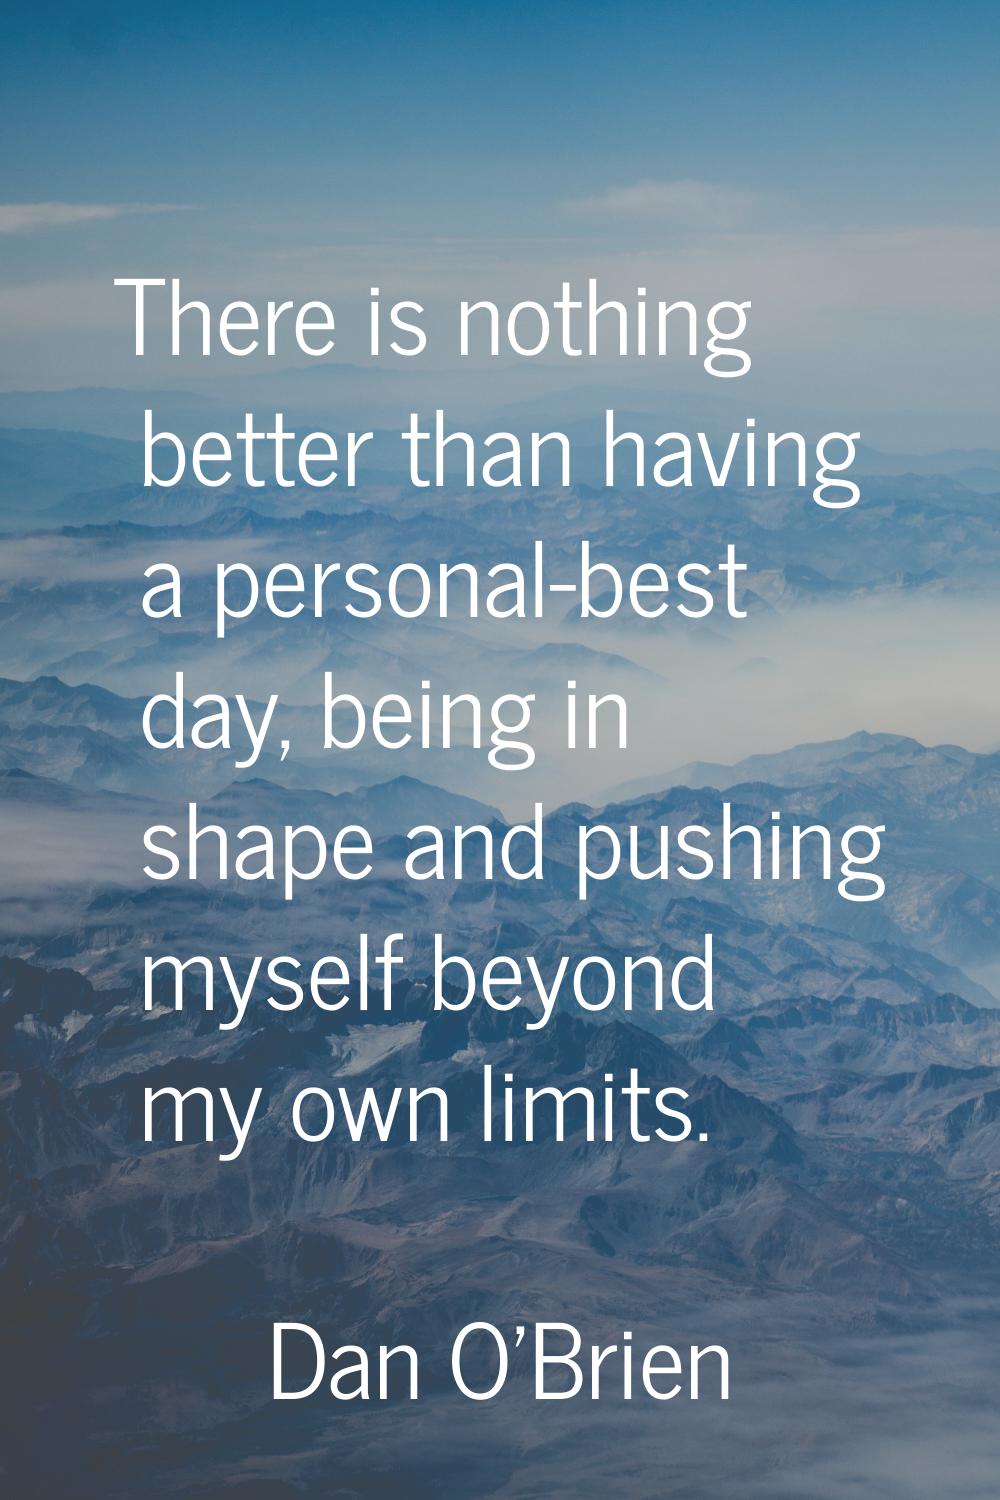 There is nothing better than having a personal-best day, being in shape and pushing myself beyond m